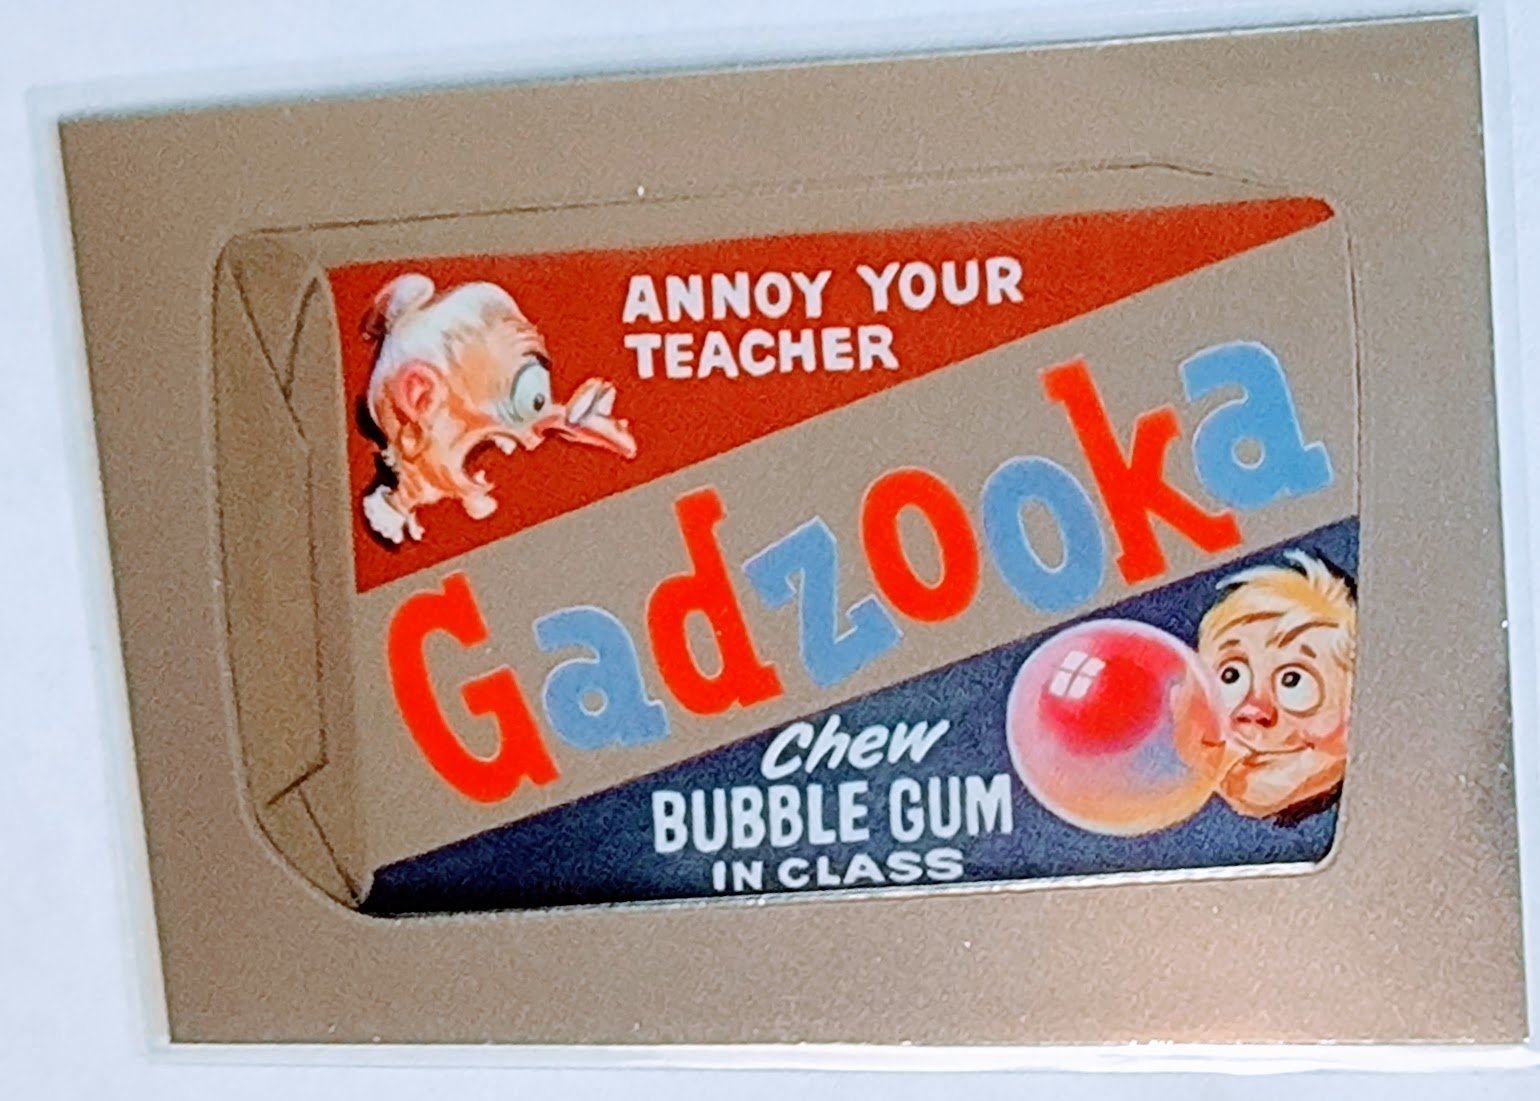 2014 Topps Wacky Packages Chrome Gadzooka Annoy Your Teacher Sticker Trading Card MCSC1 simple Xclusive Collectibles   